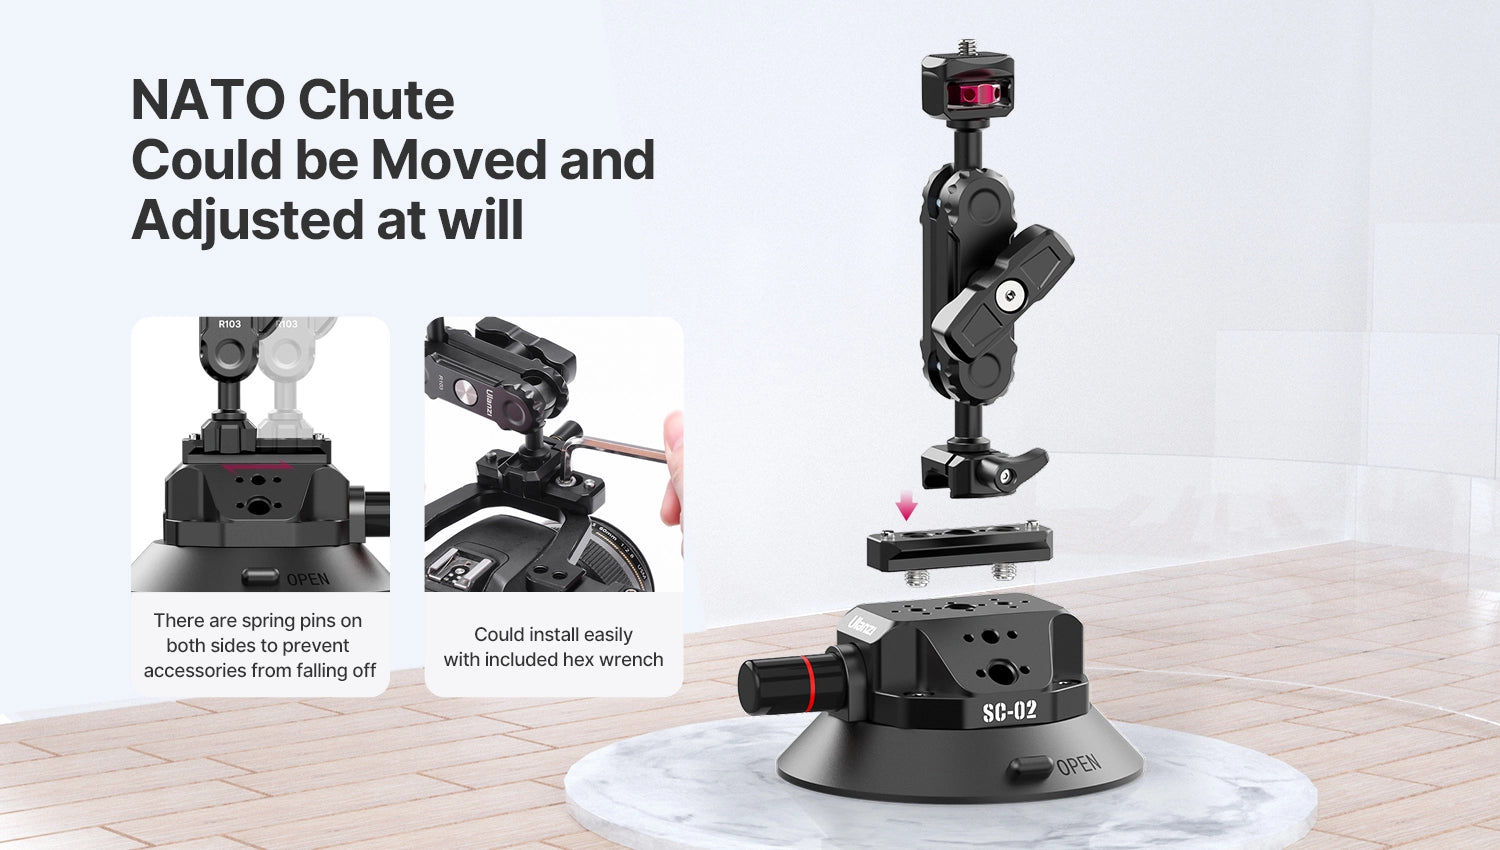 Ulanzi SC-02 Strong Suction Cup Mount (4.5")